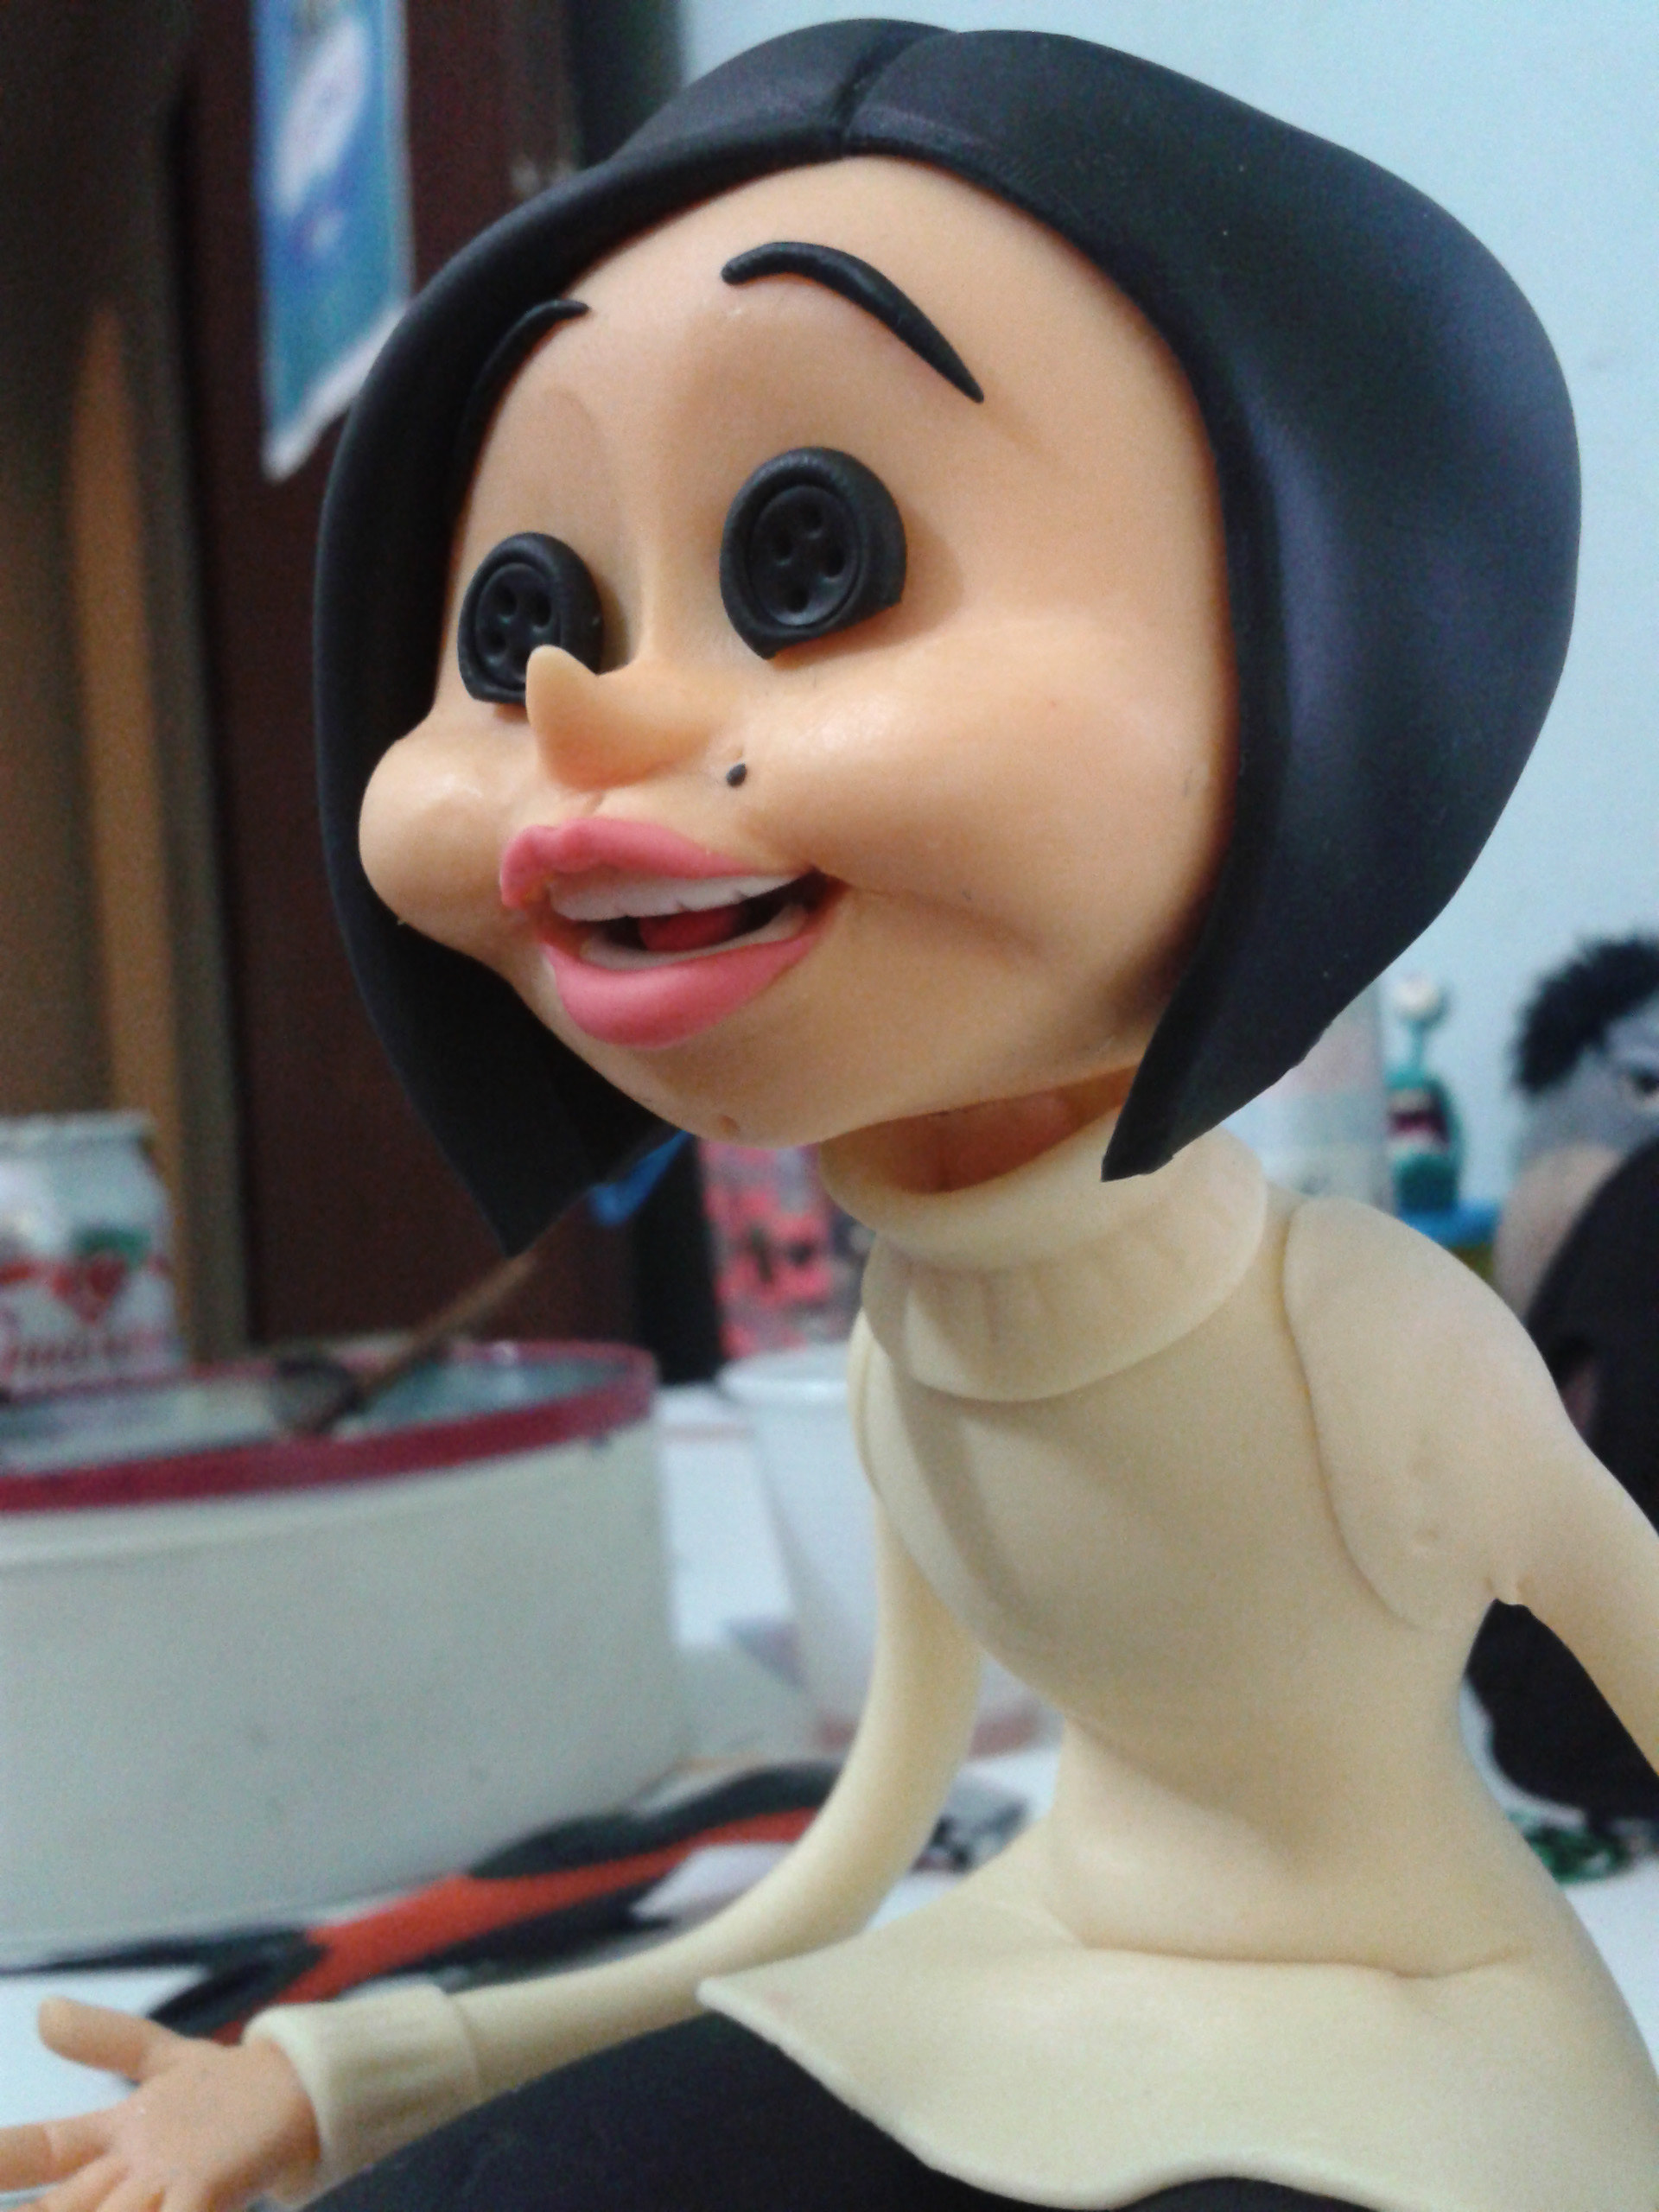 The Other Mother (Coraline). 